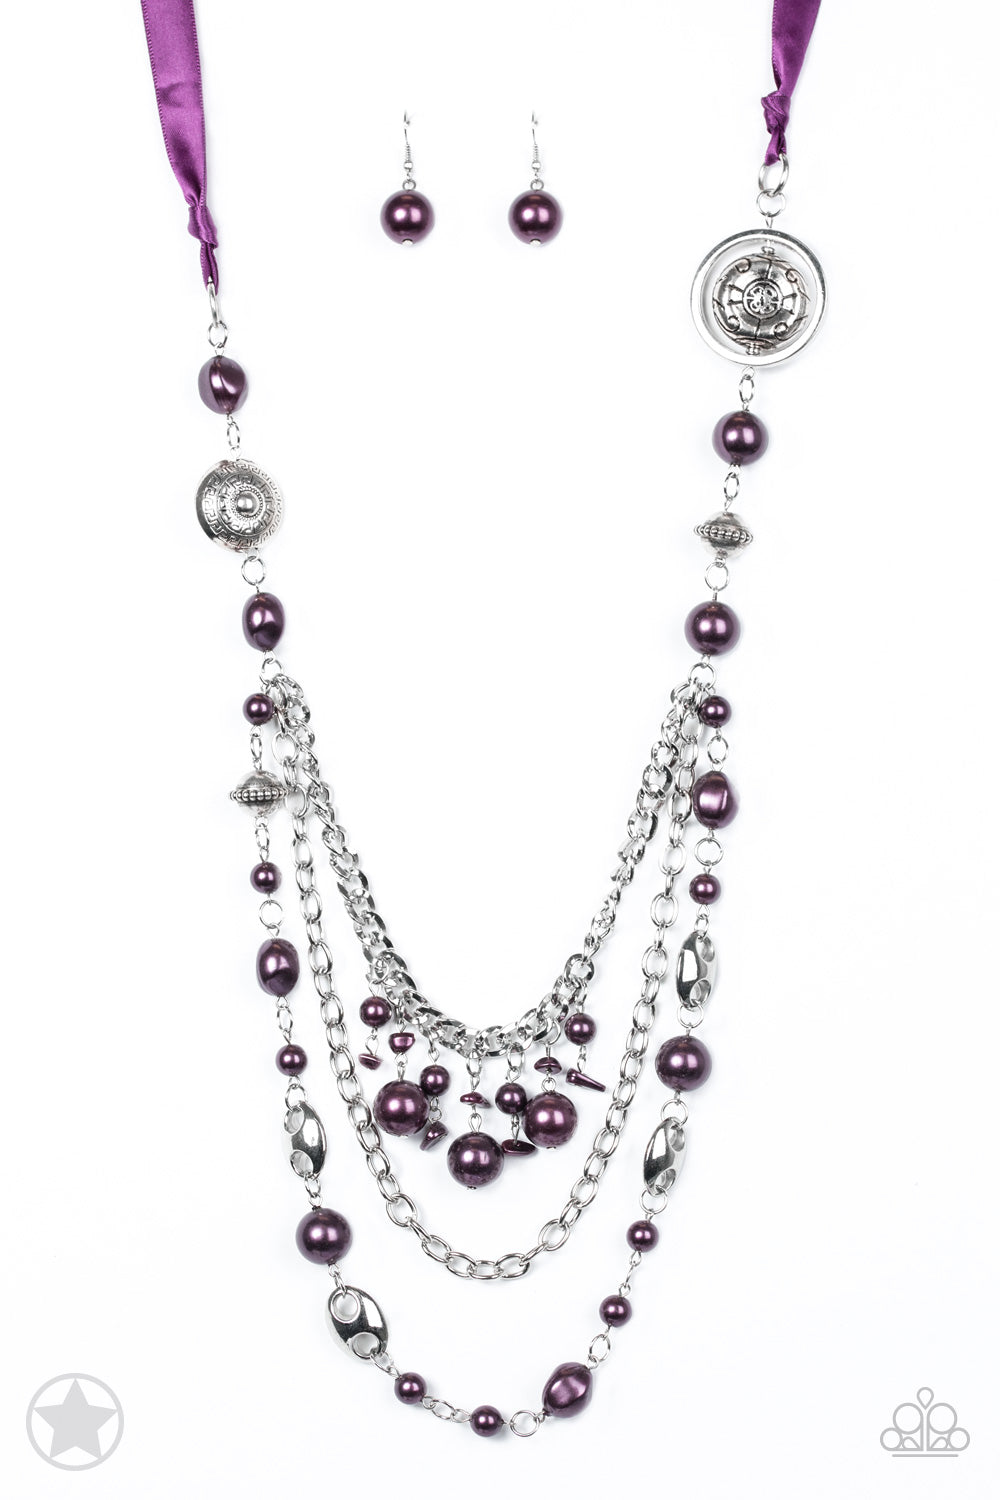 A silky purple ribbon replaces a traditional chain to create a timeless look. Pearly deep purple beads and funky silver pieces intermix with varying lengths of silver chains to give a fresh take on a Victorian-inspired piece.   Sold as one individual necklace. Includes one pair of matching earrings.